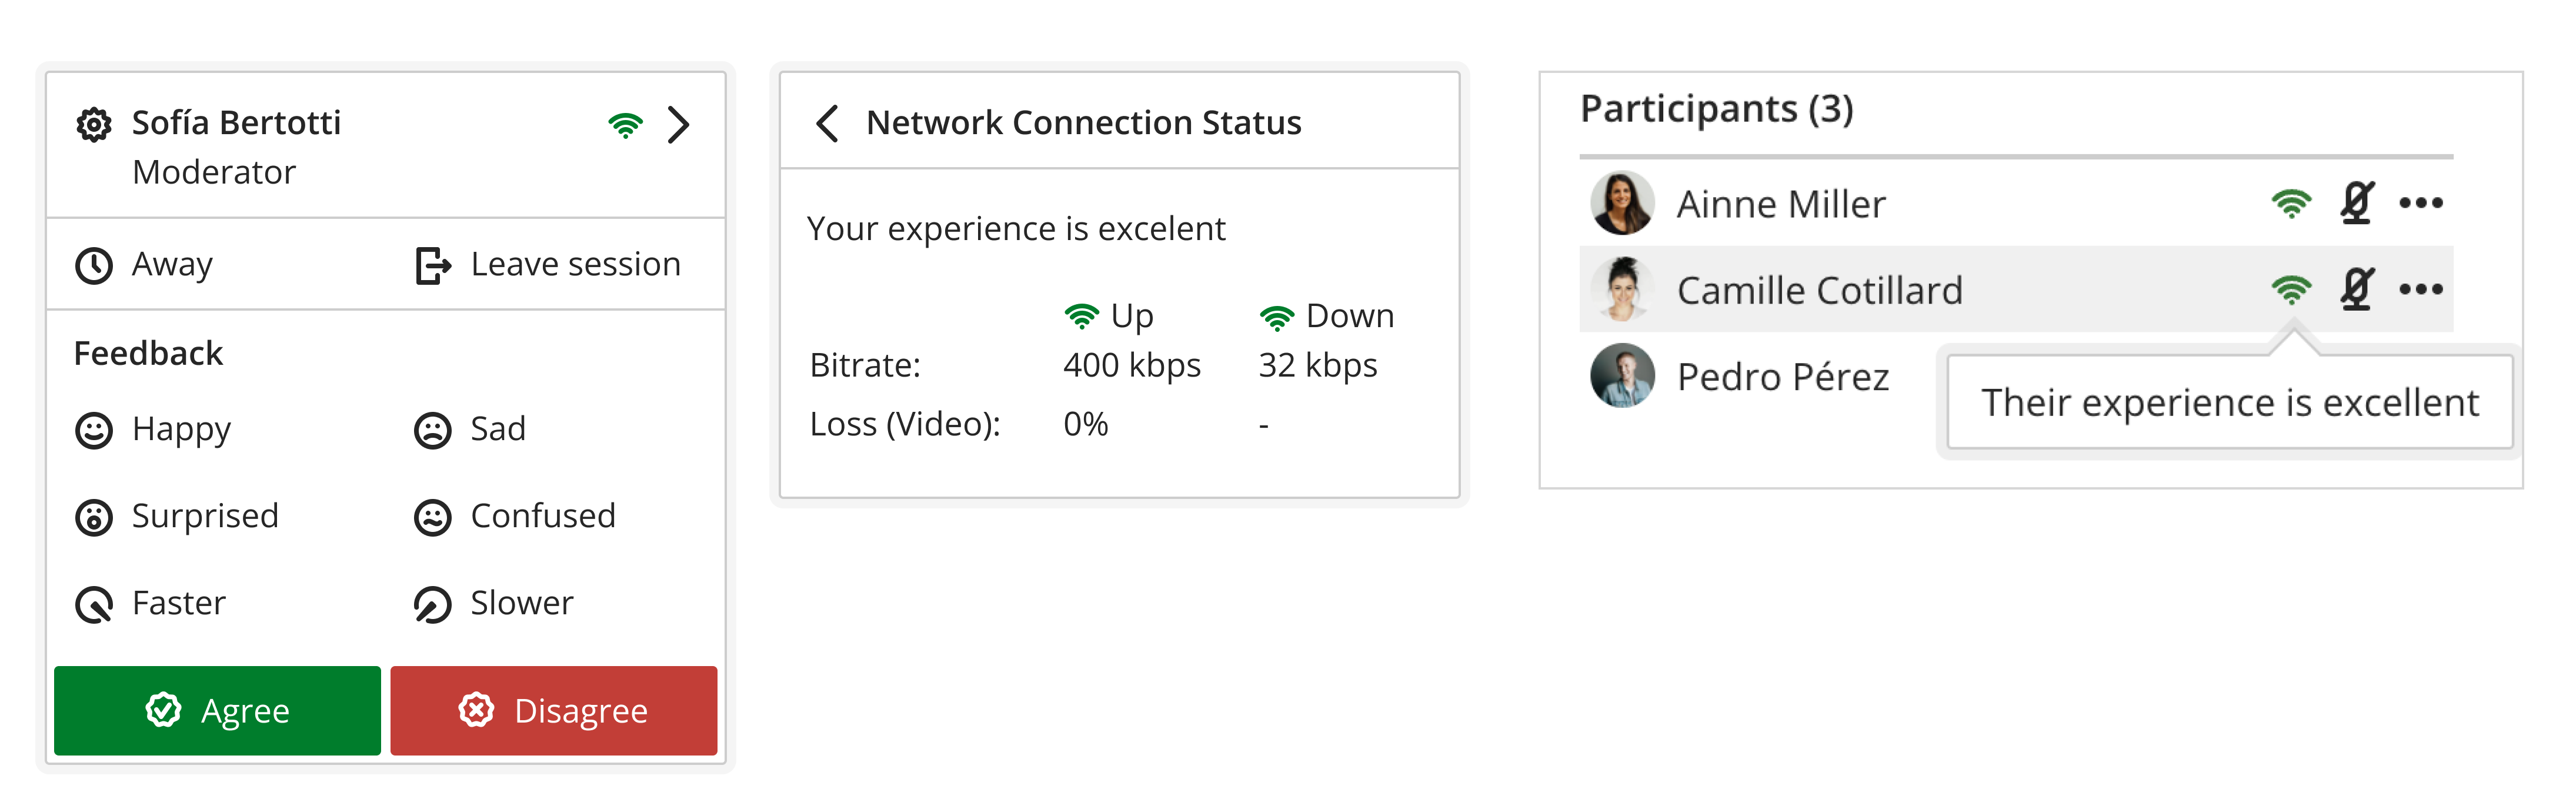 After opening the profile from the picture in the main toolbar, the network connection status is highlighted showing the quality of the experience.